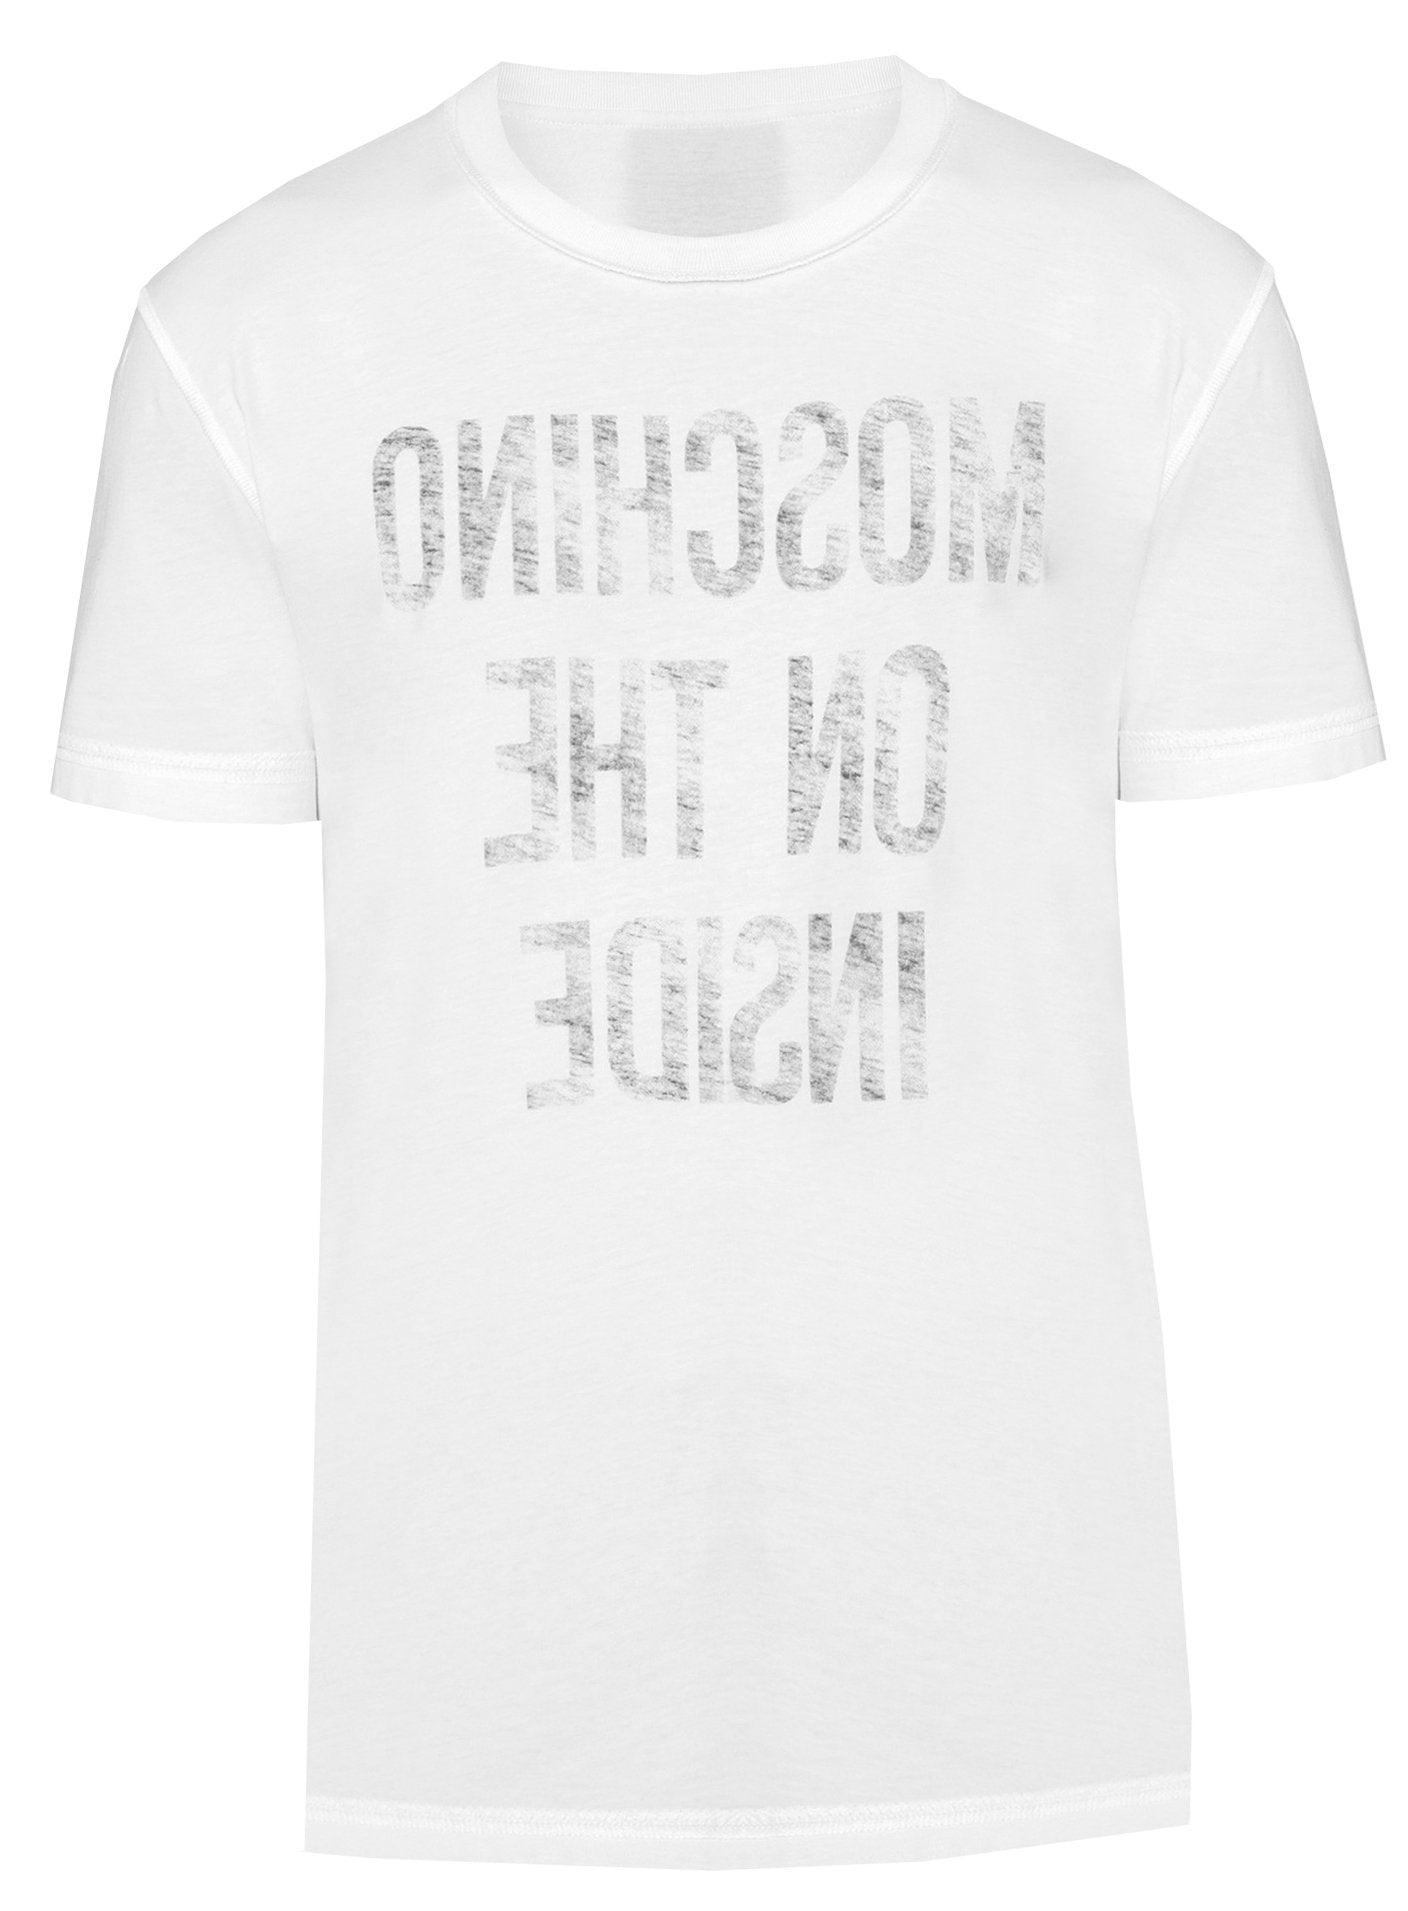 Inside Out Graphic Tee - White